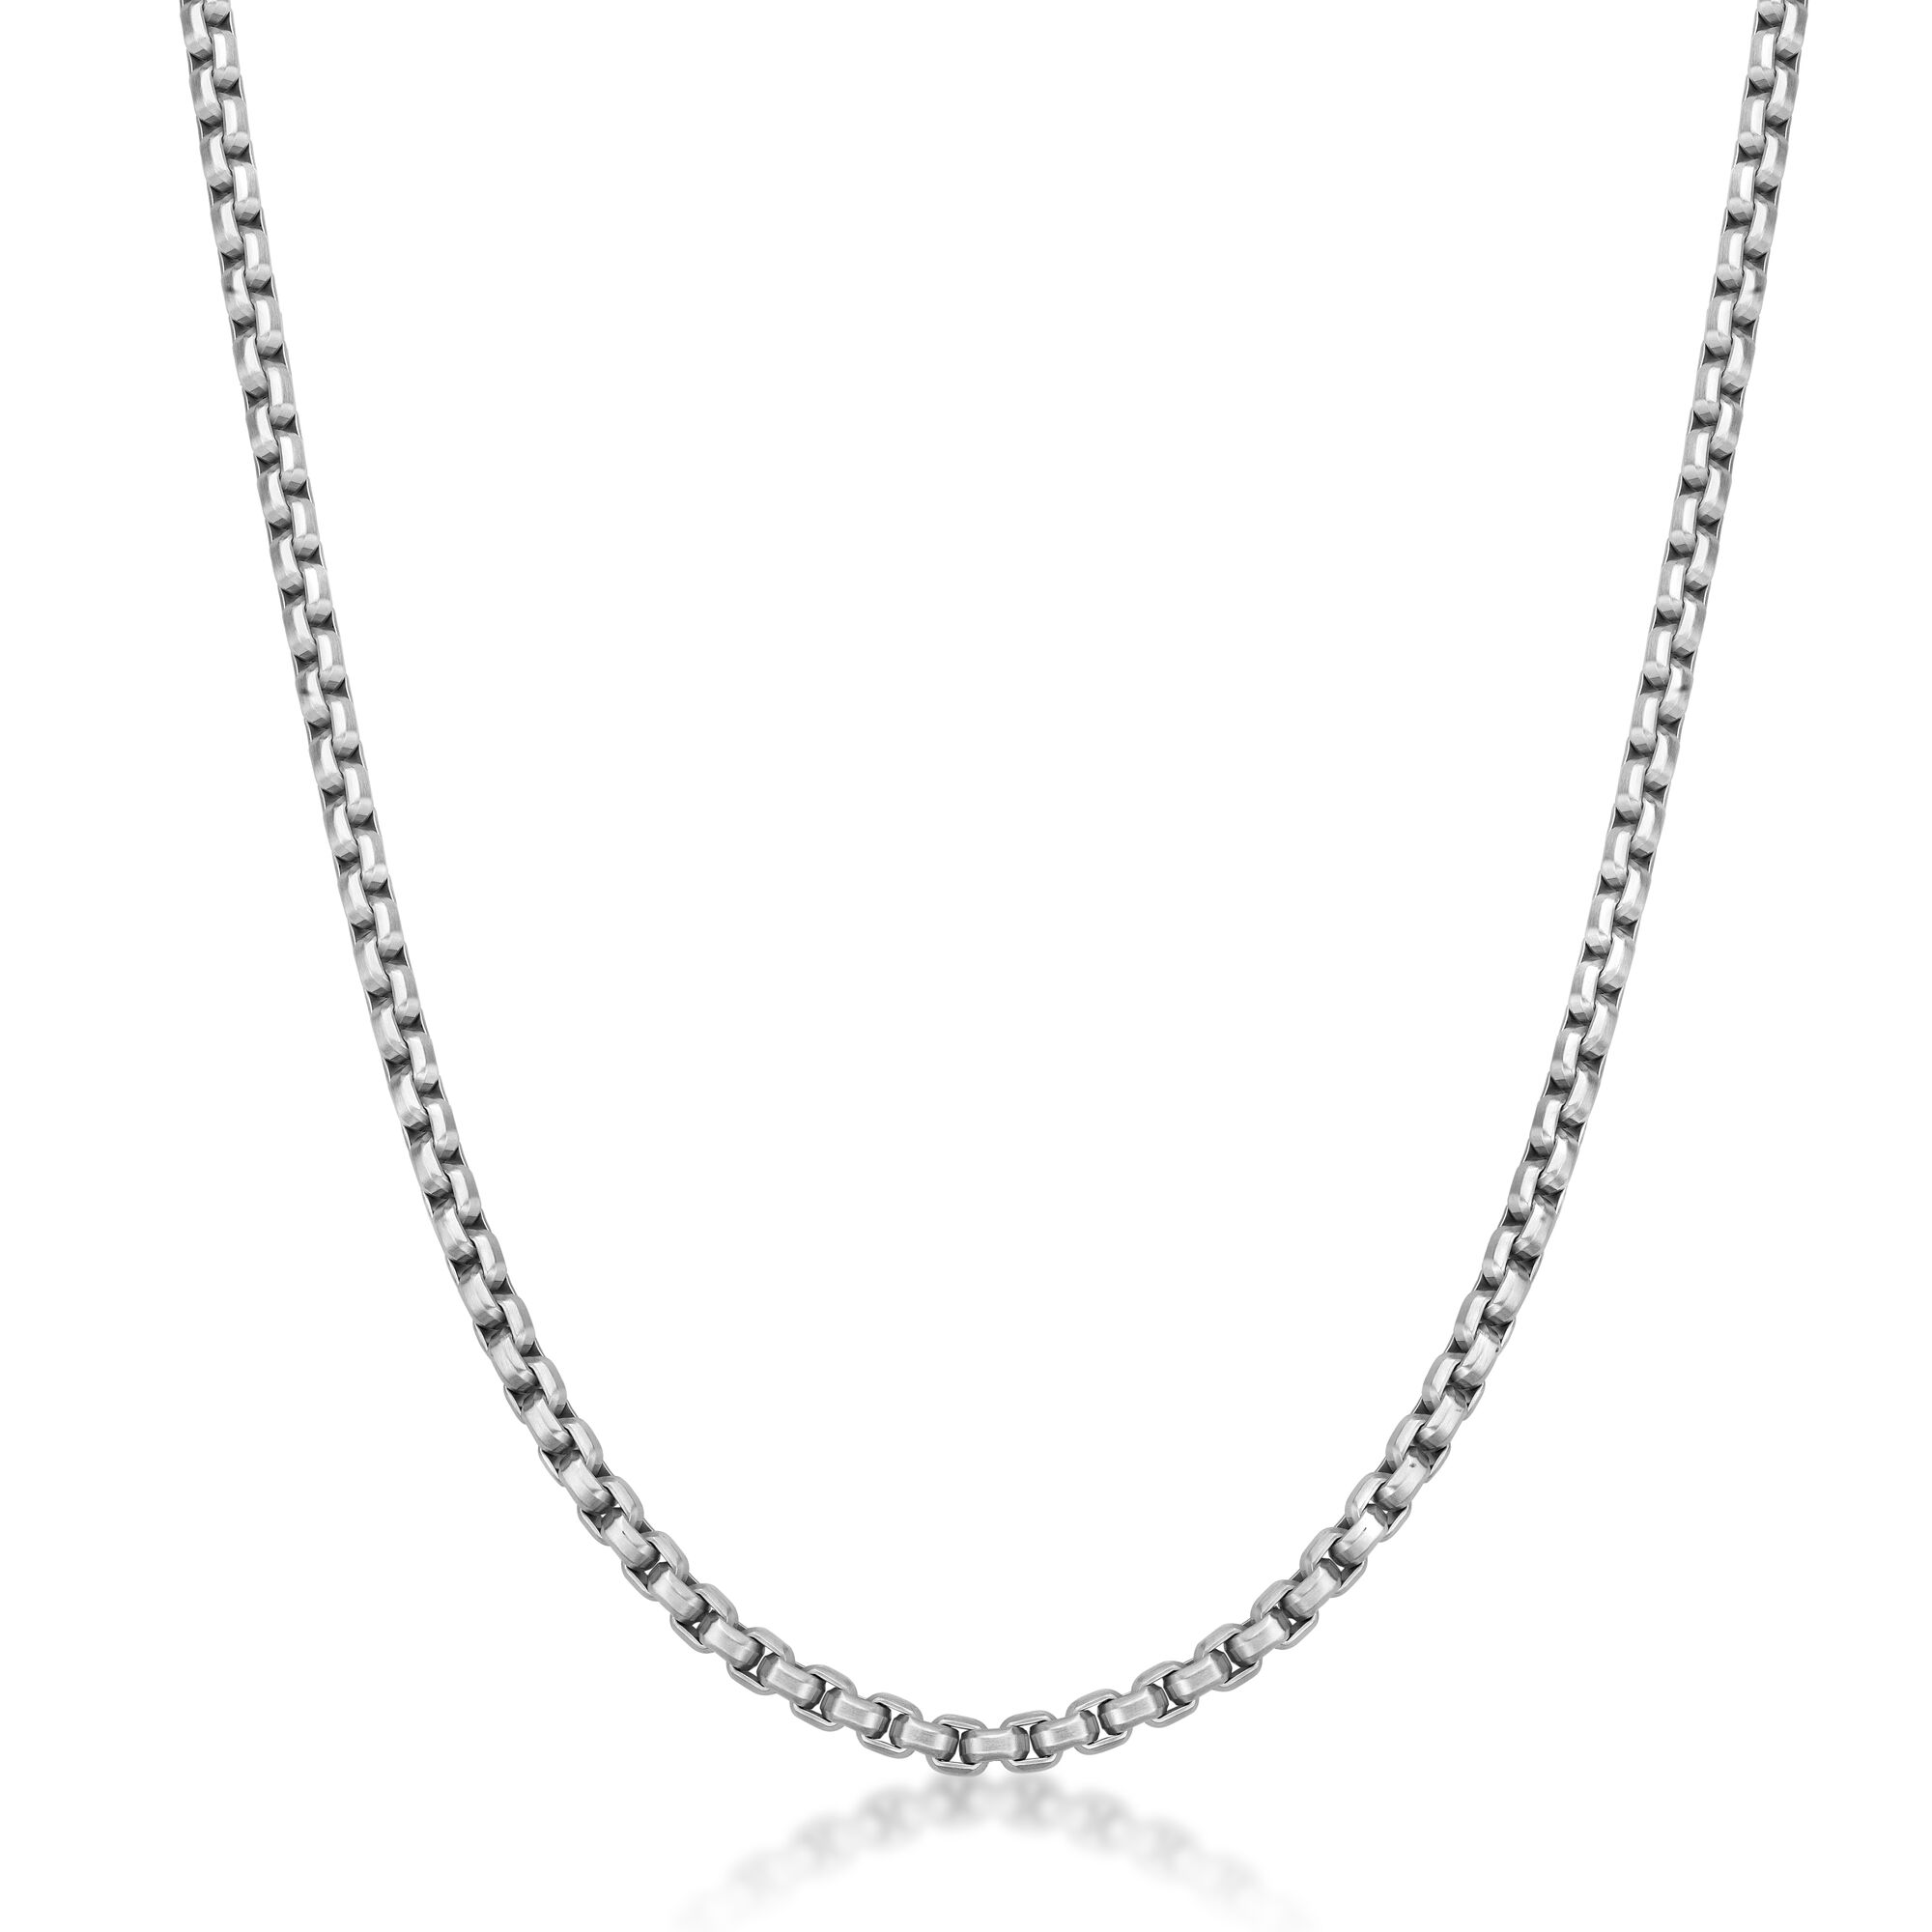 Men's Stainless Steel Two Tone 5MM Round Box Chain Necklace - 22 Inch | Metro Jewelry